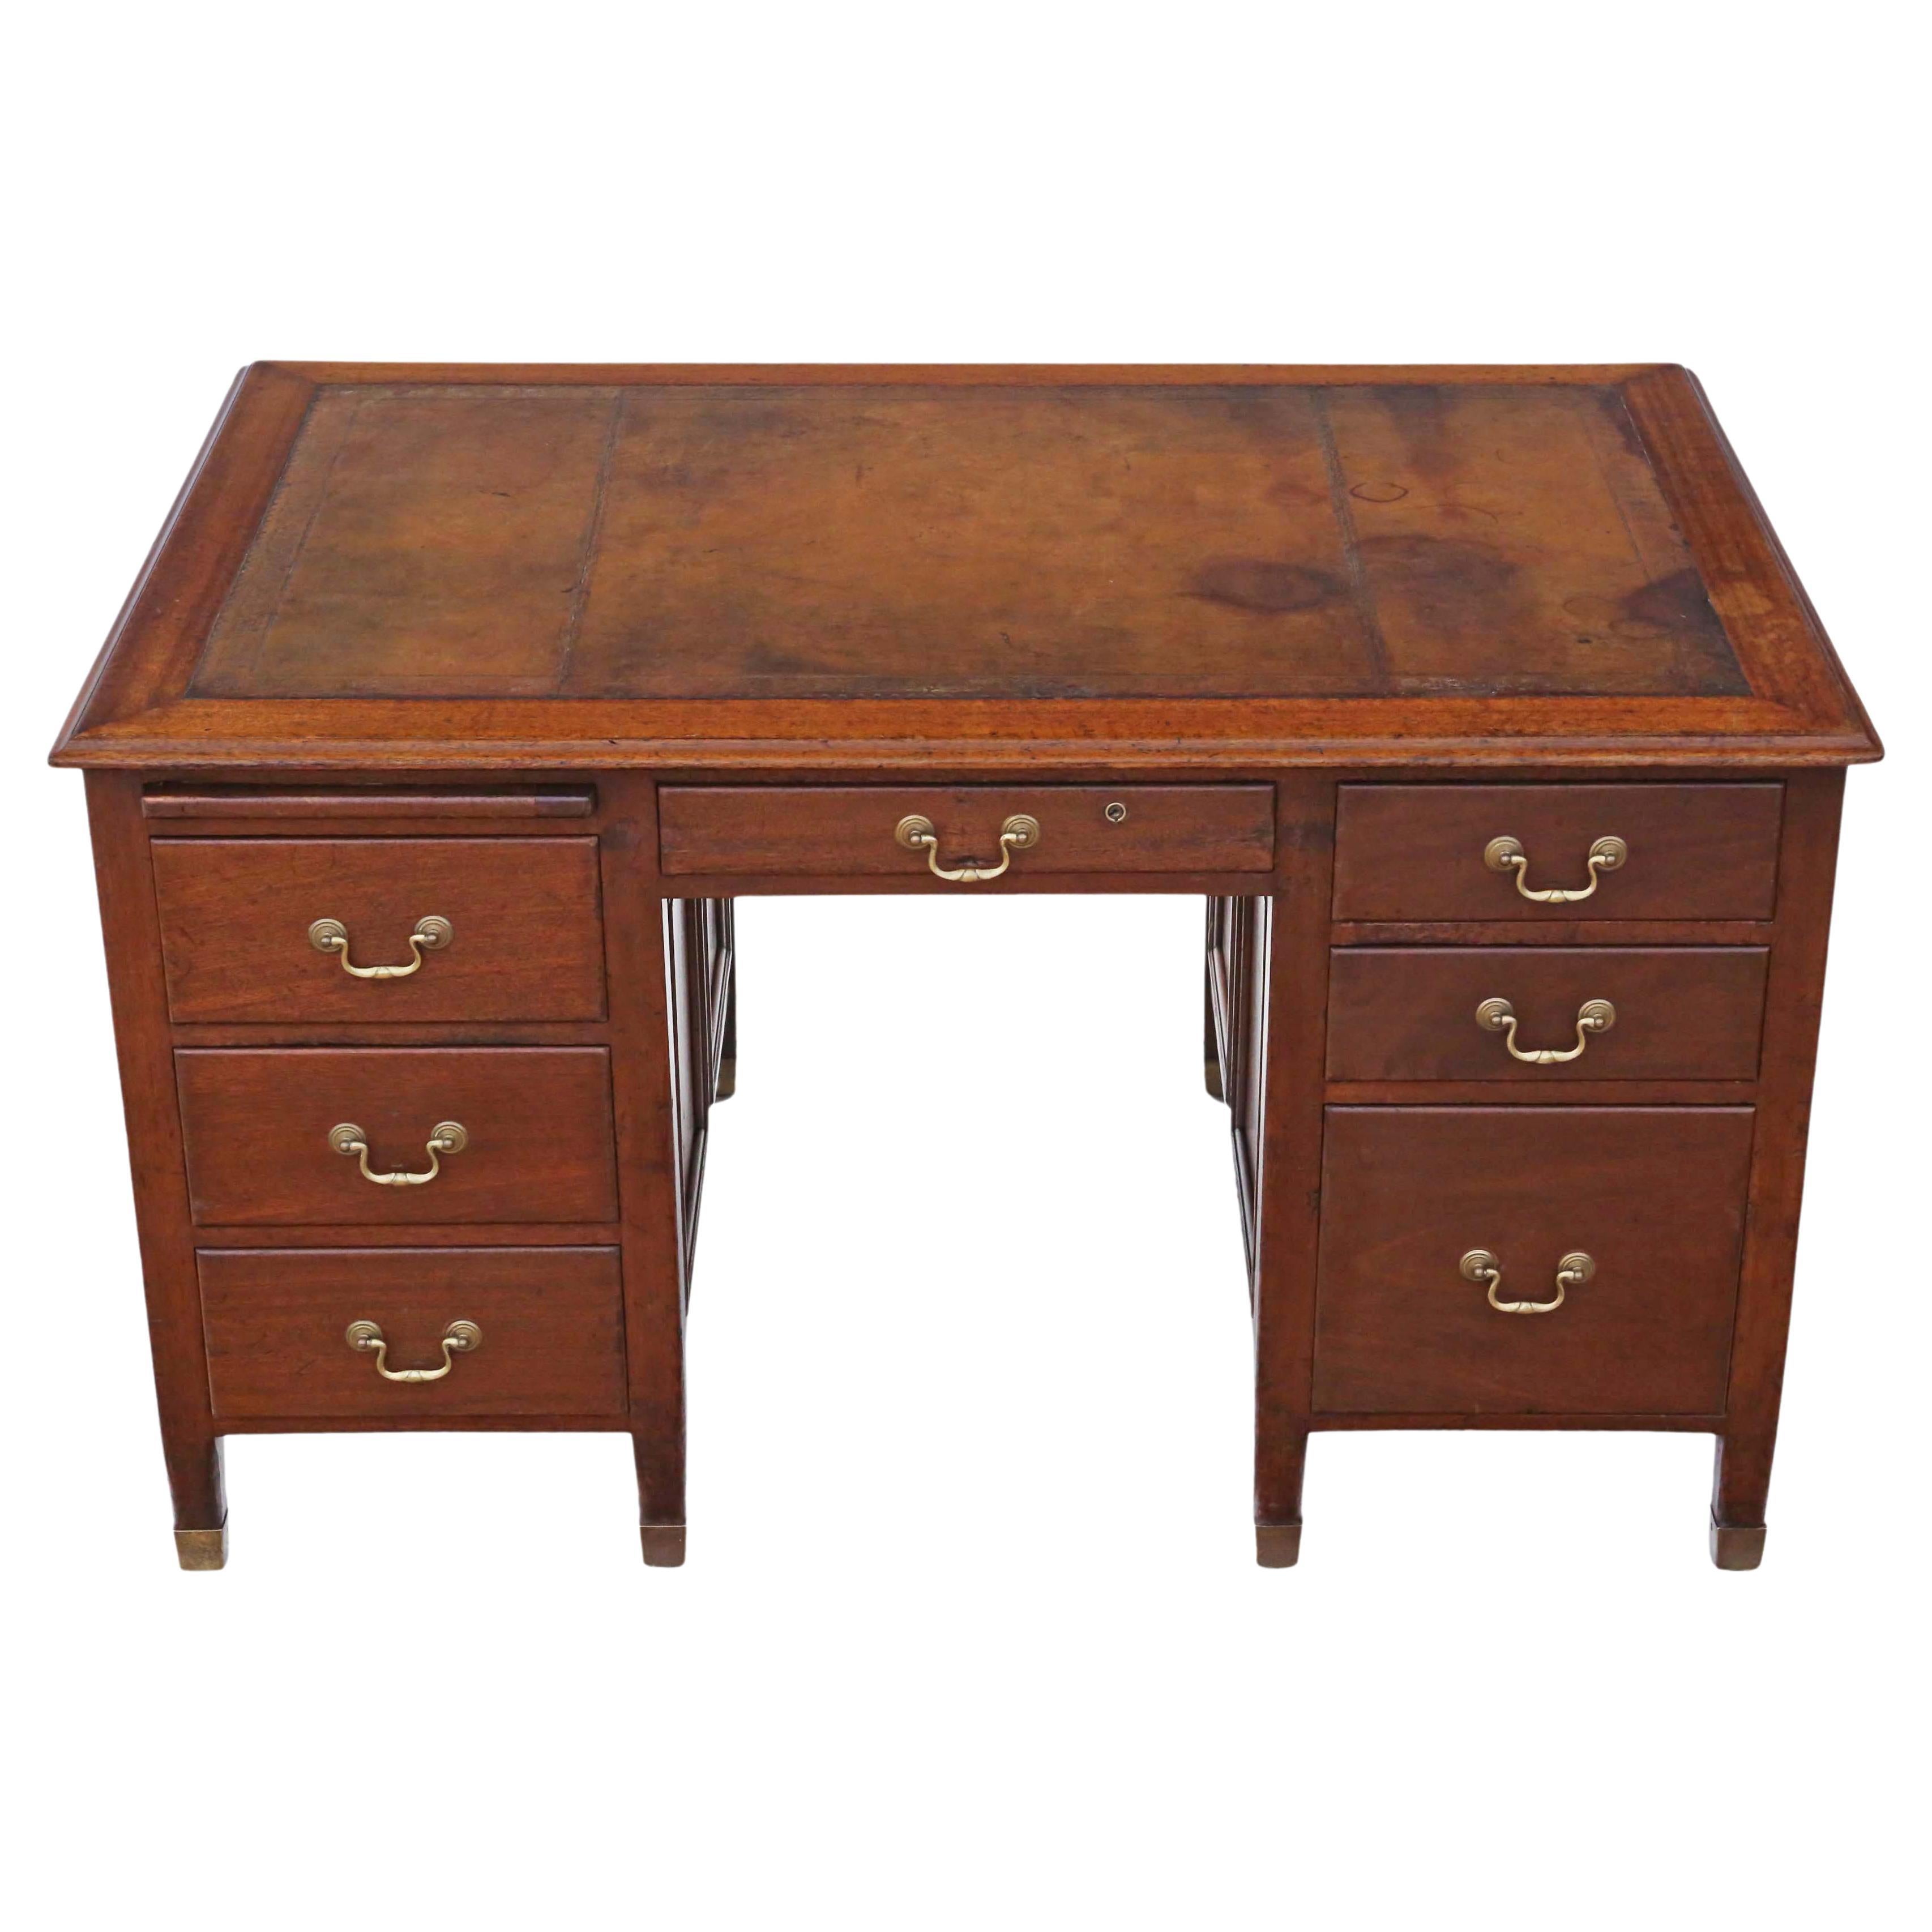 Mahogany Twin Pedestal Partner's Desk of Antique Quality from the 1920s